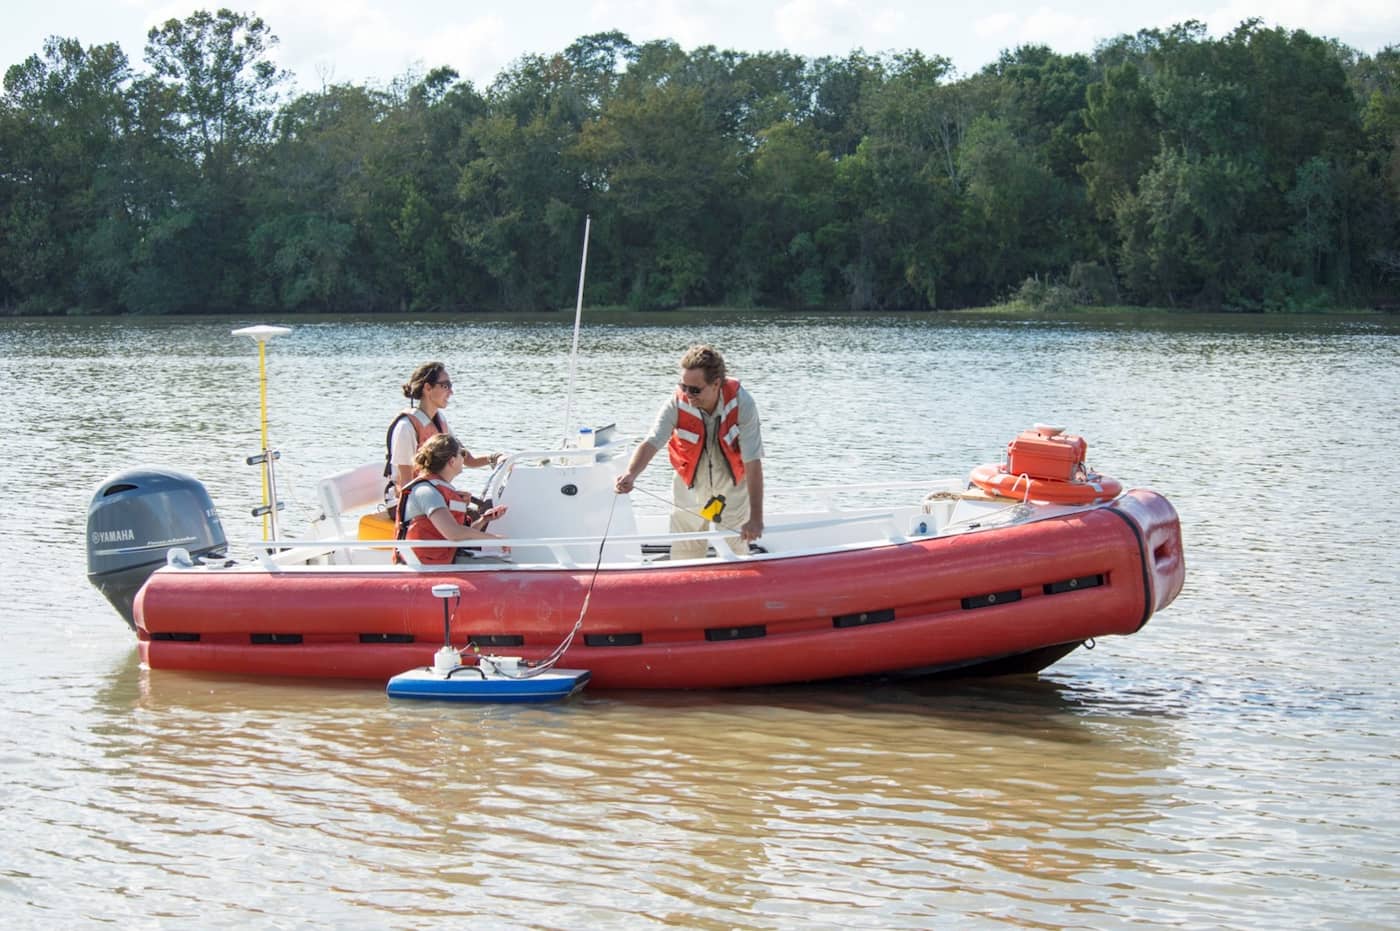 Two women and a man operate field instruments from inside an orange airboat